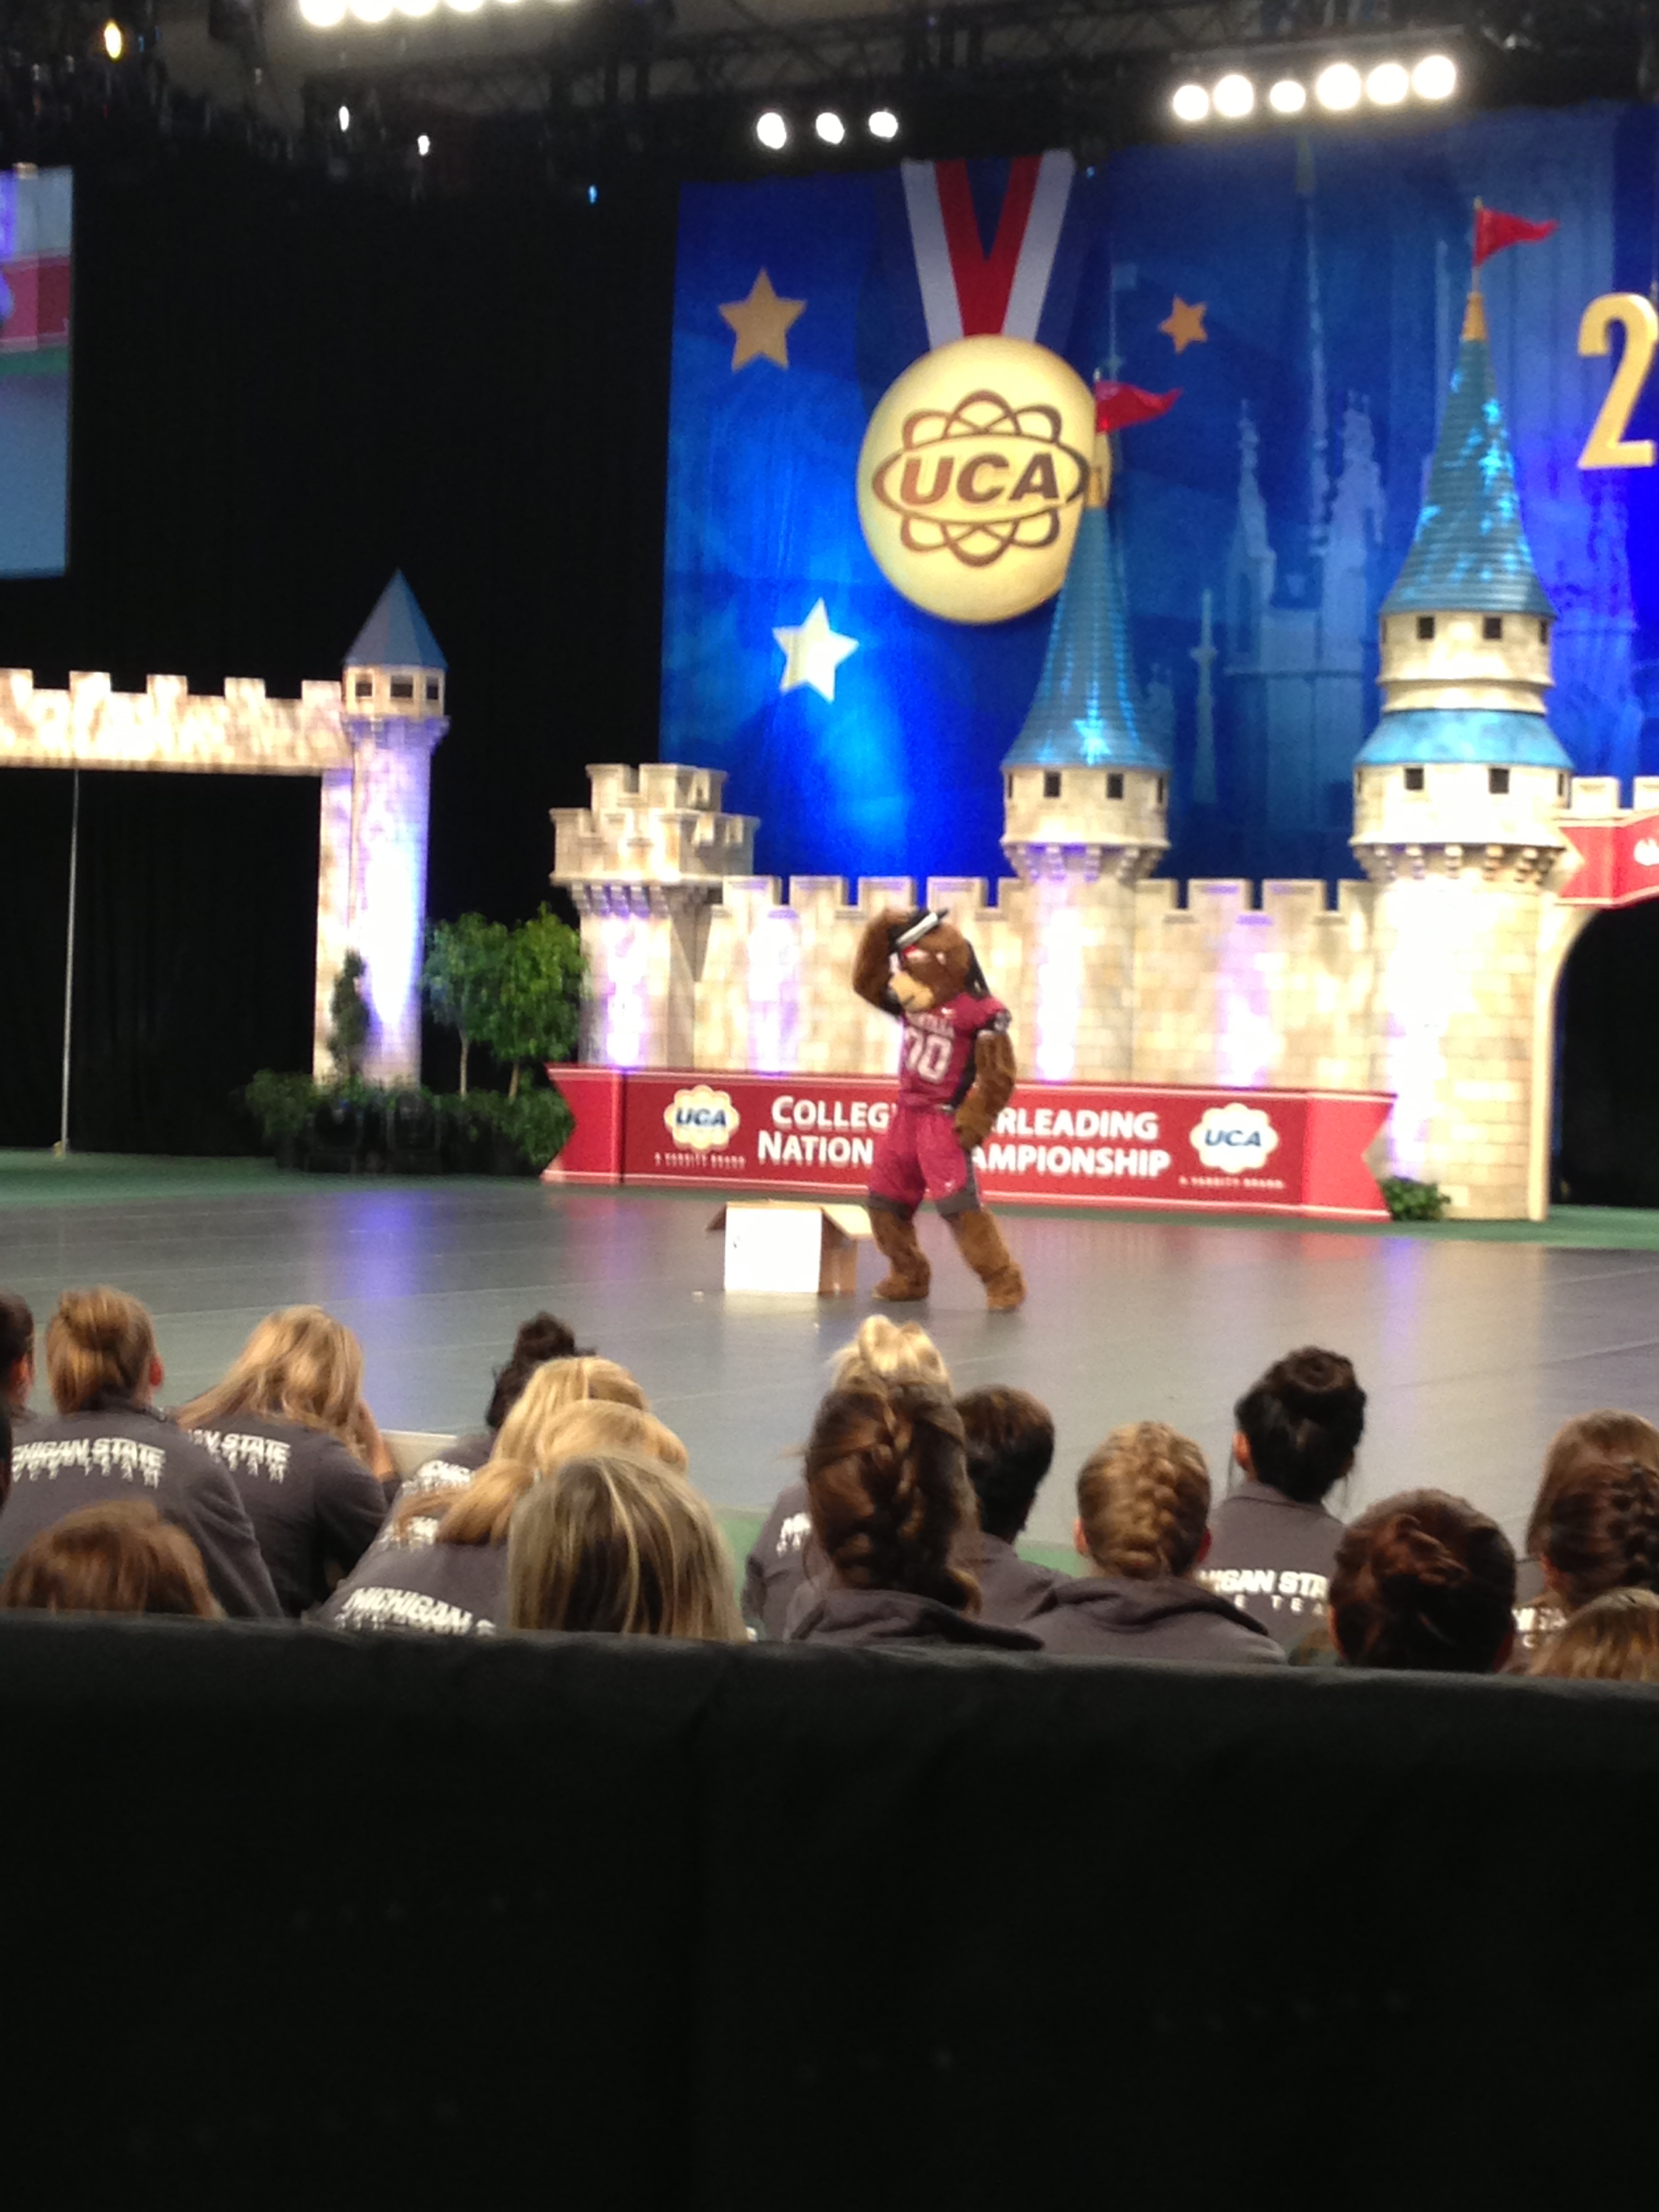 Monte performing his skit inside the HP Field House.